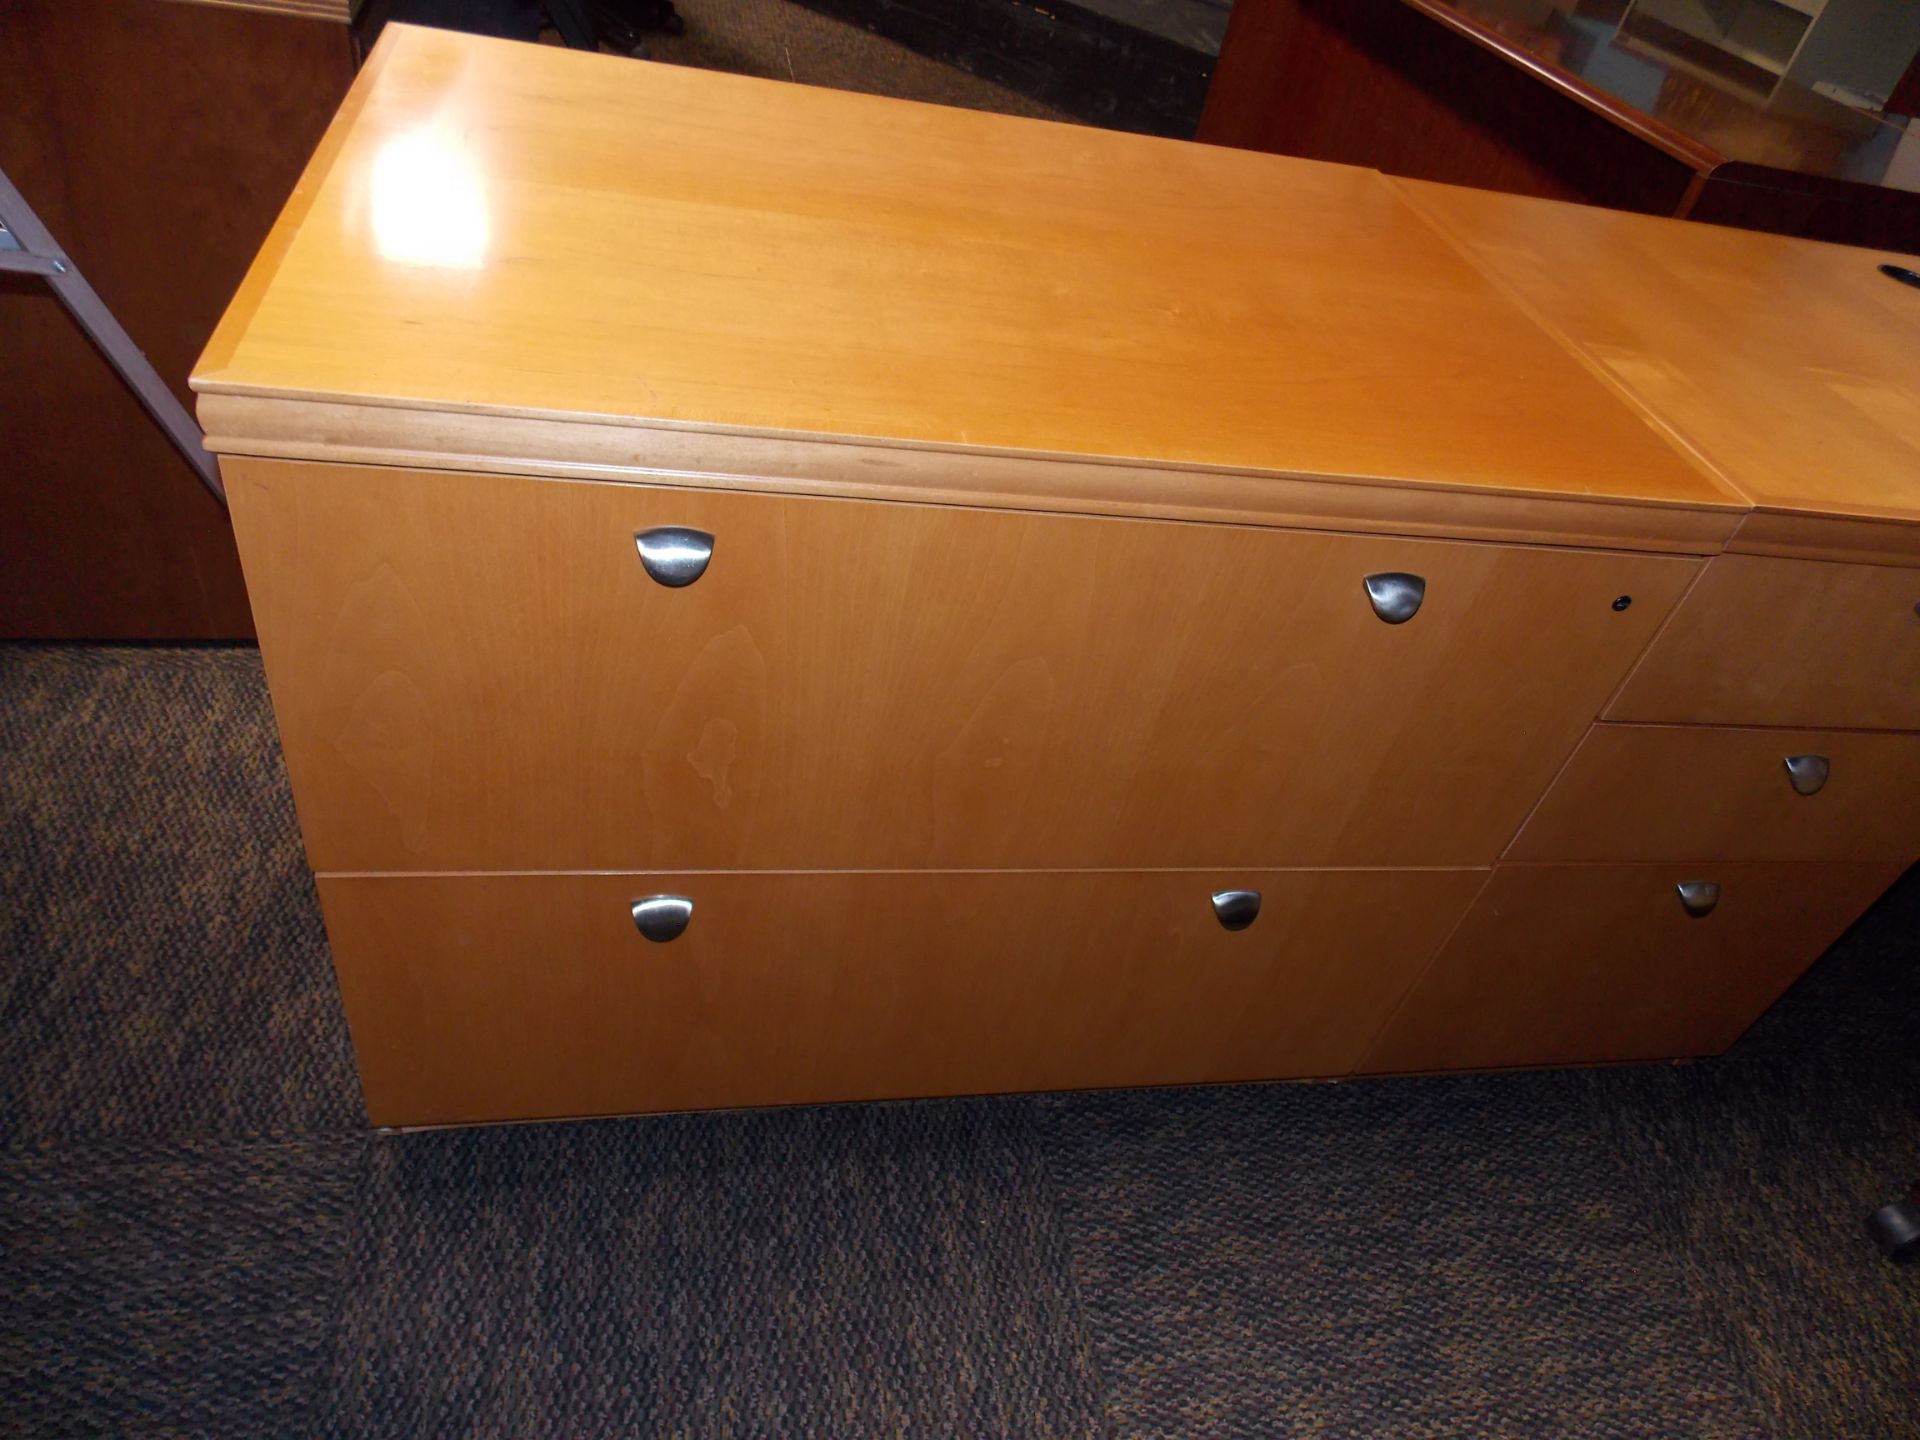 KIMBALL 2 DRAWER LEGAL OR LETTER SIZE LATERAL FILE CABINET MATCHING THE CORNER DESK - CHOICE OF 2